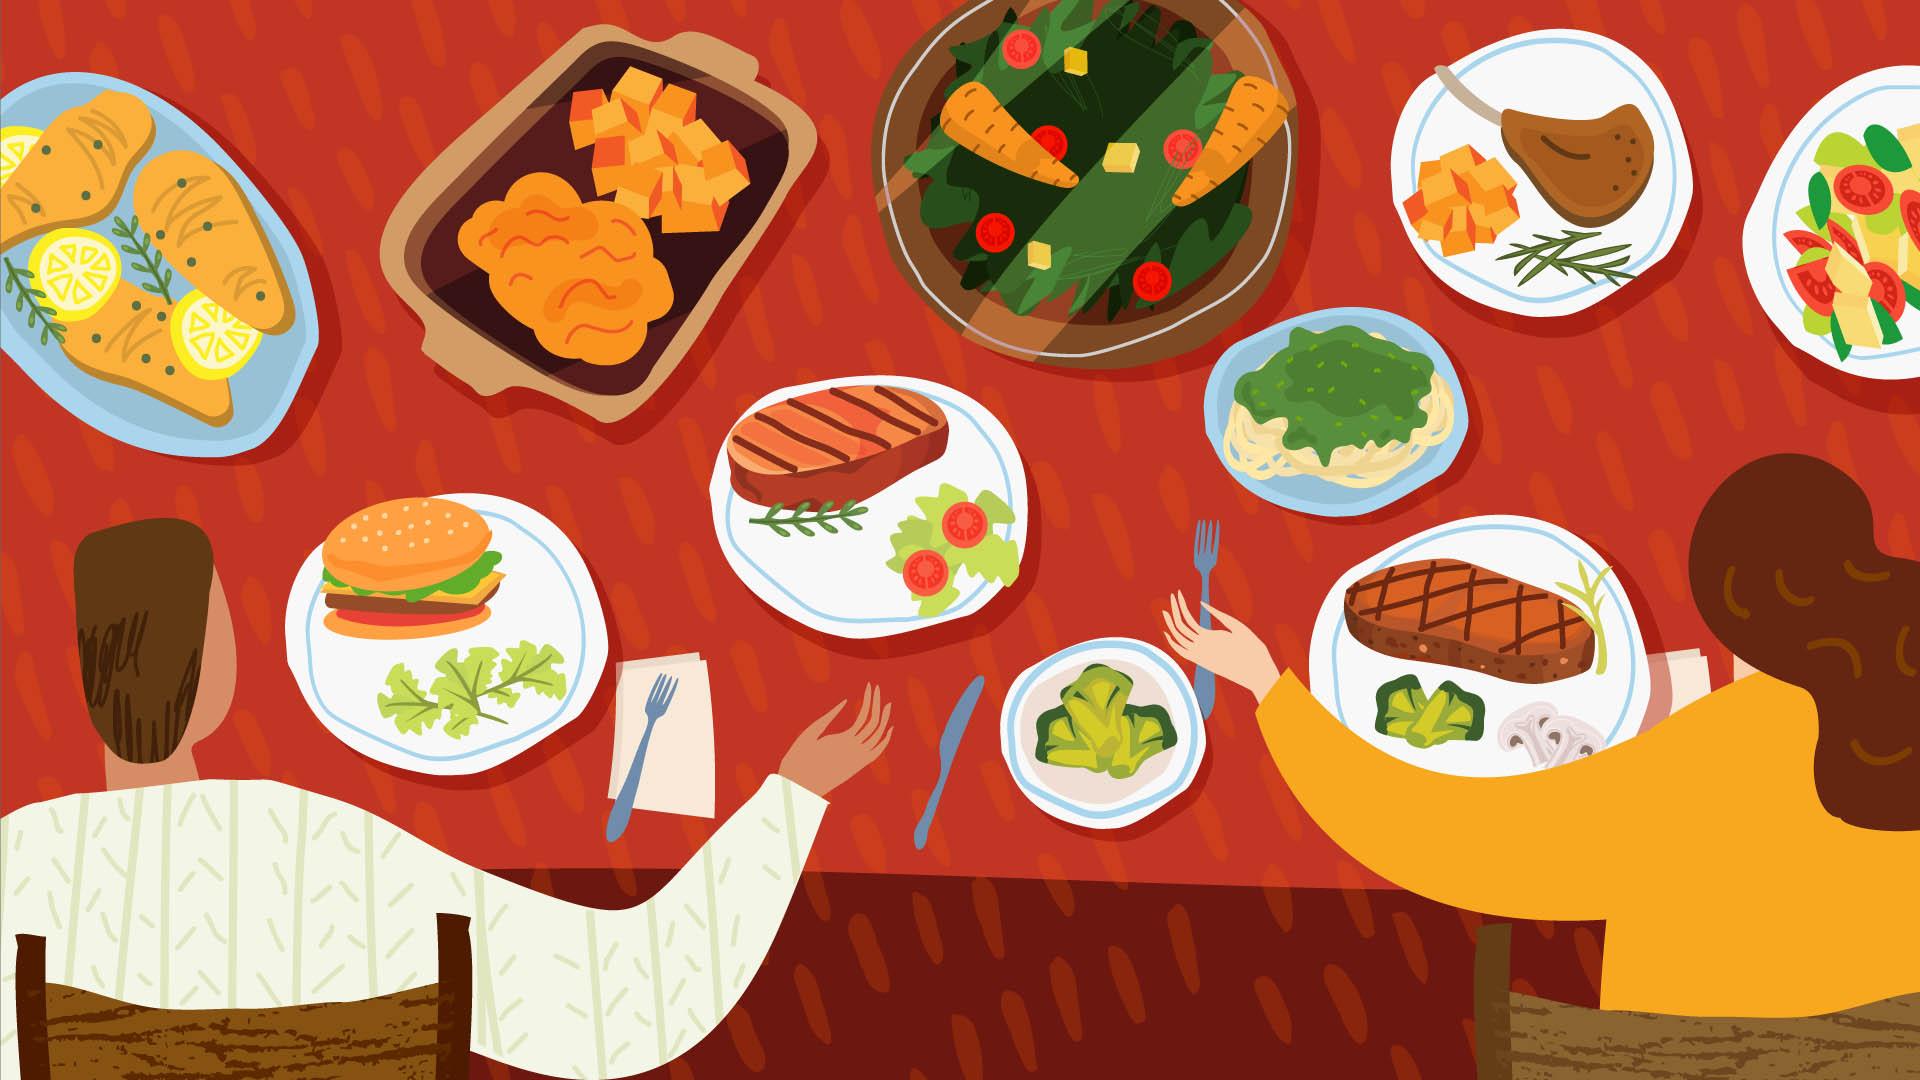 Meal on table graphic